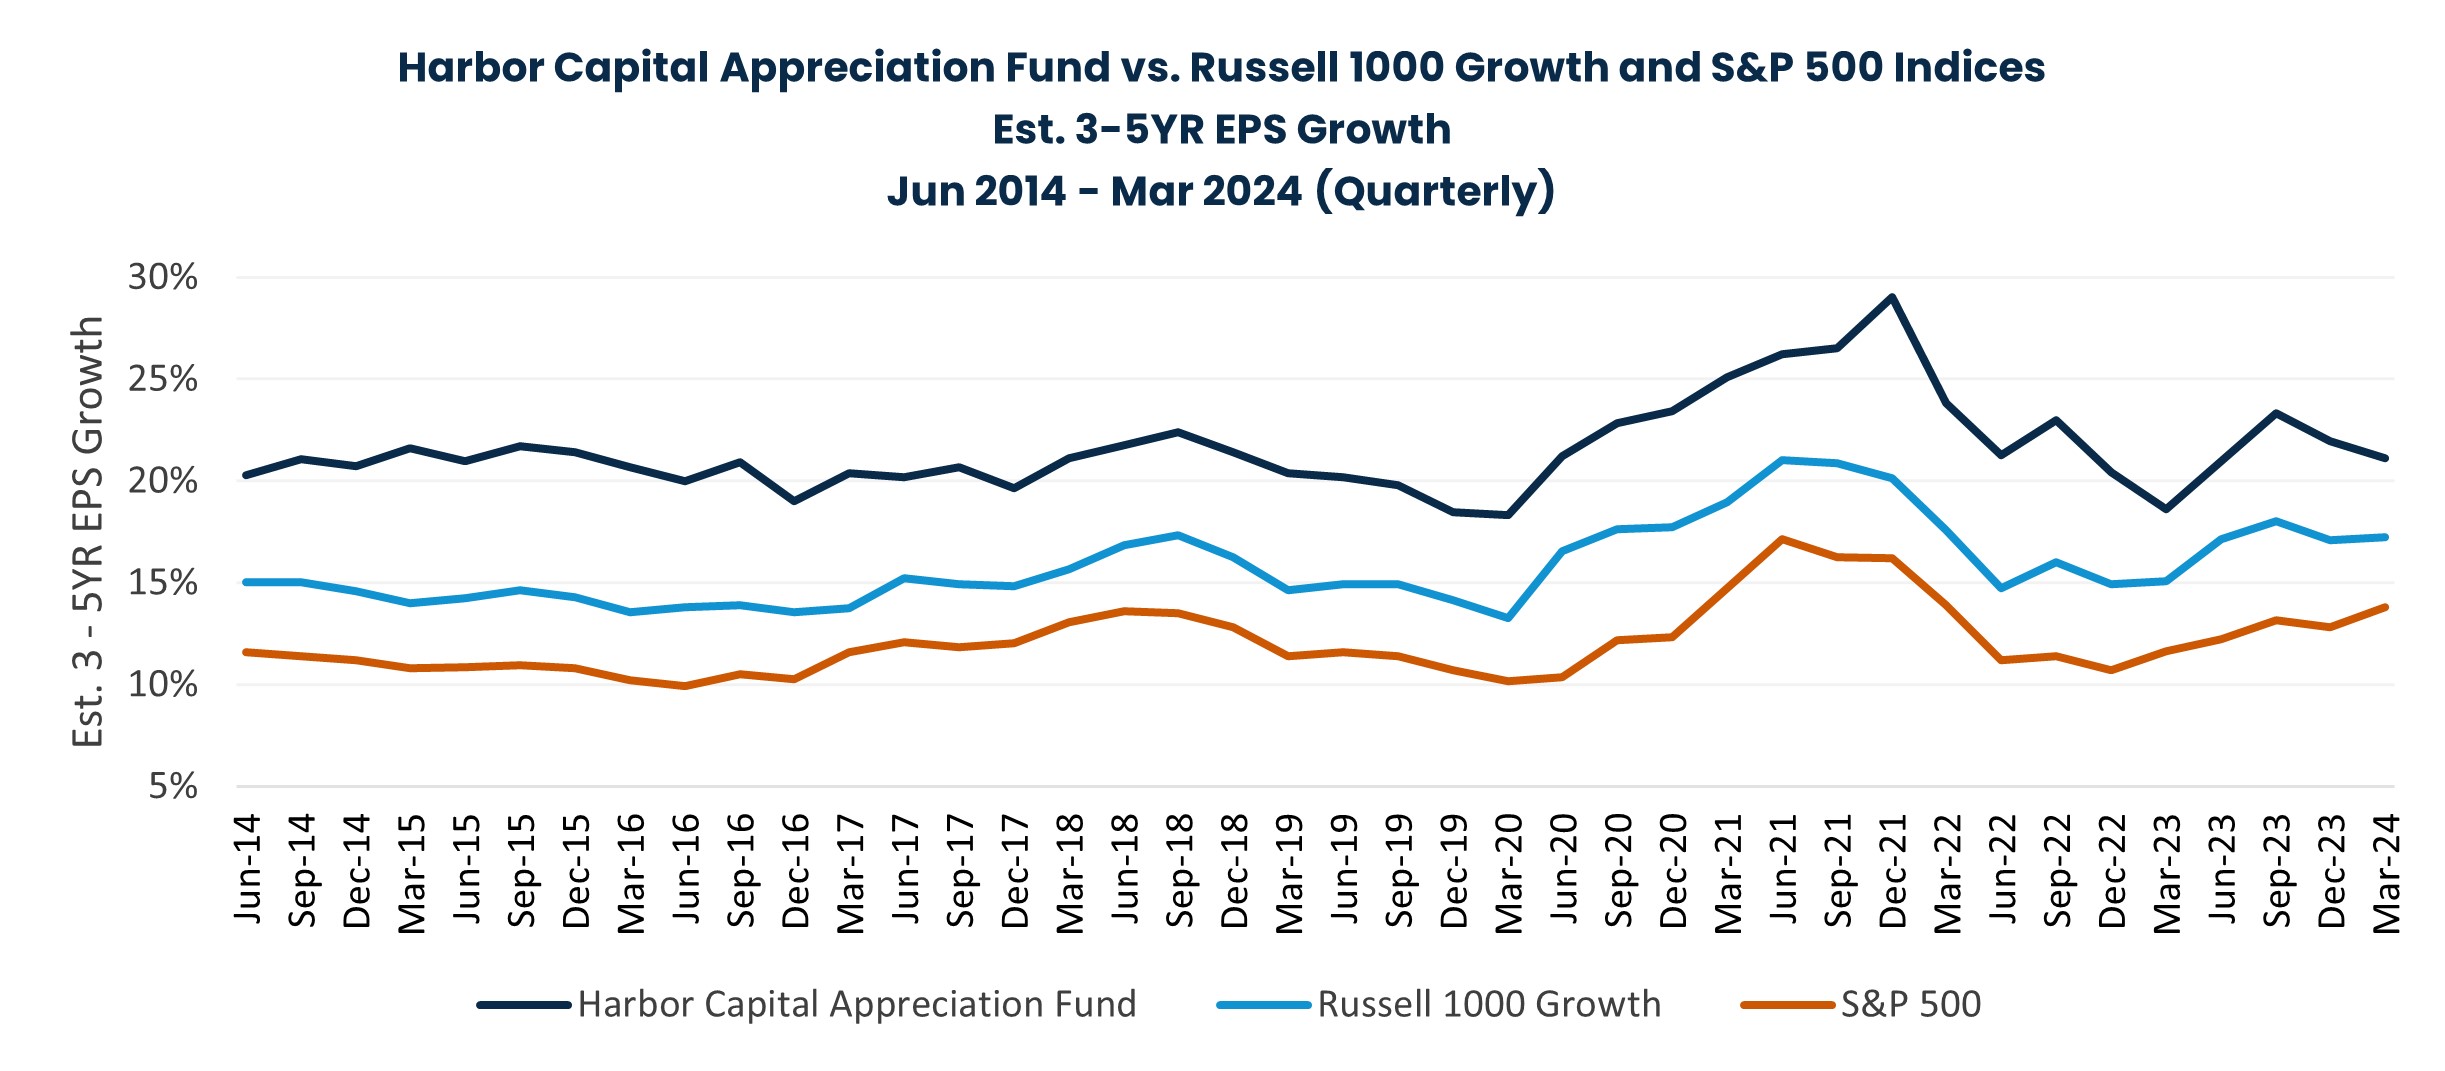 Harbor Capital Appreciation Fund vs. Russell 1000 Growth and S&P 500 Indices Est. 3-5YR EPS Growth Jun 2014 - Mar 2024 (Quarterly)